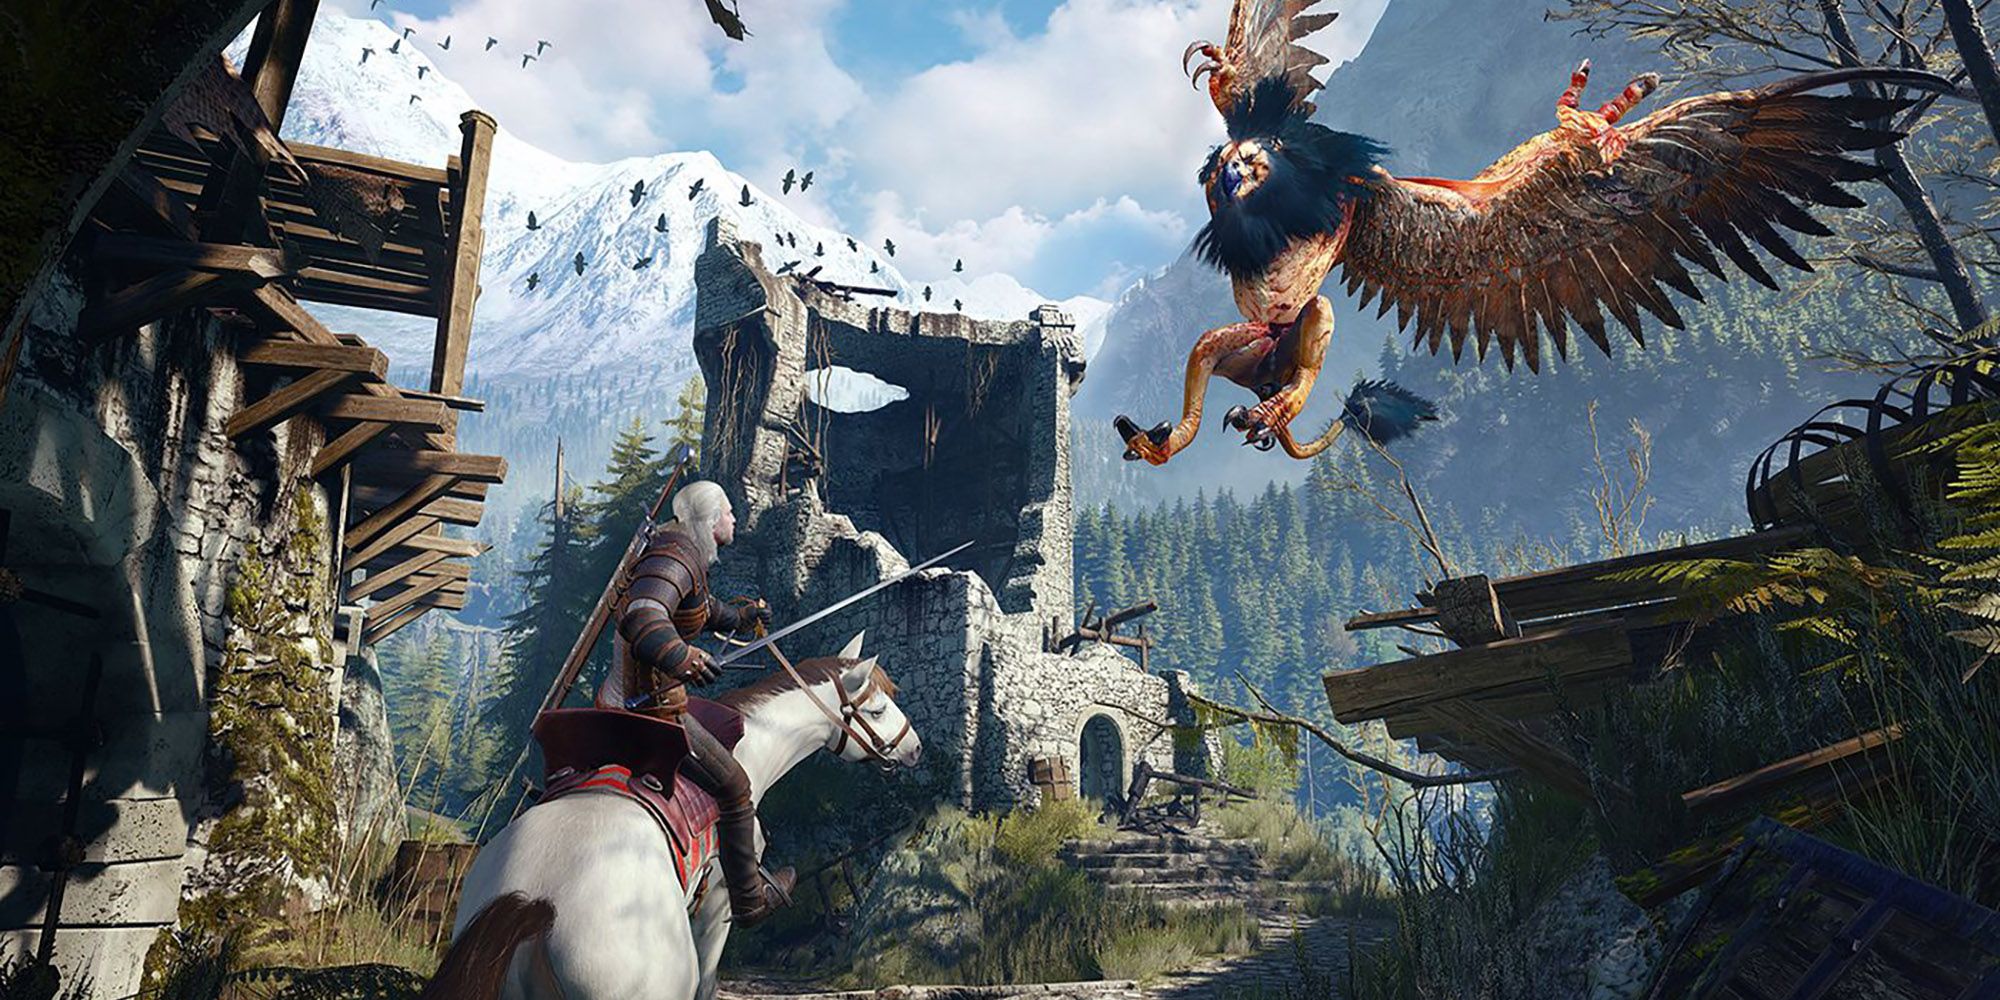 Battle with a Griffin in the Witcher 3